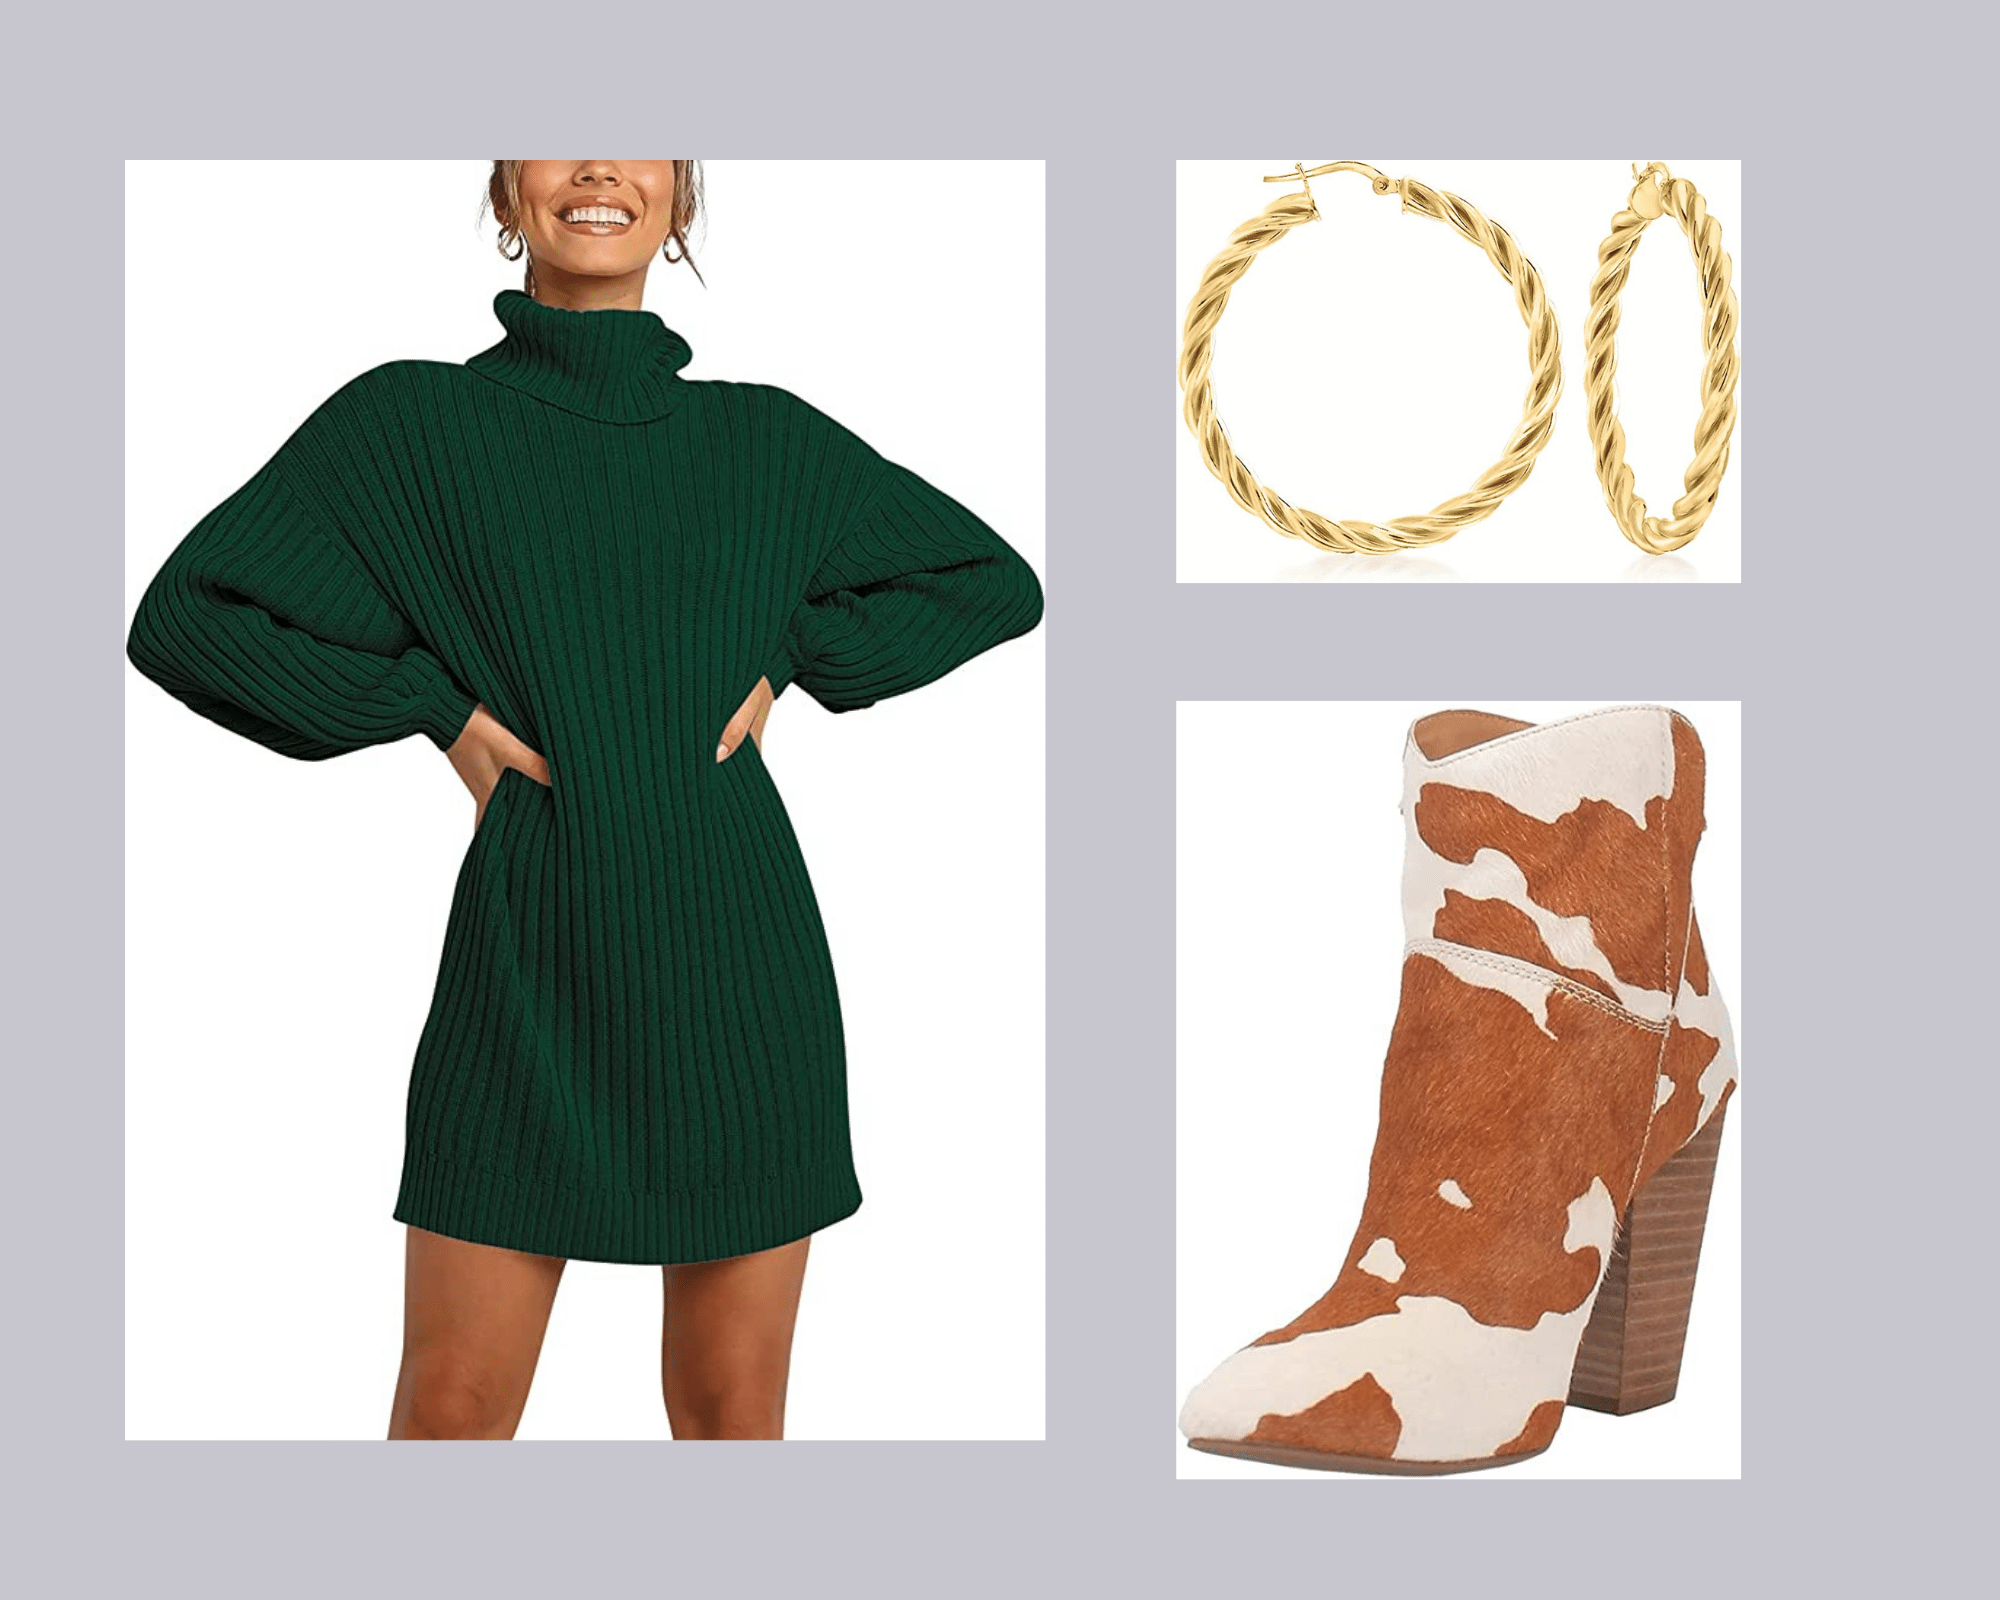 Green dress, braided hoop earrings and boots